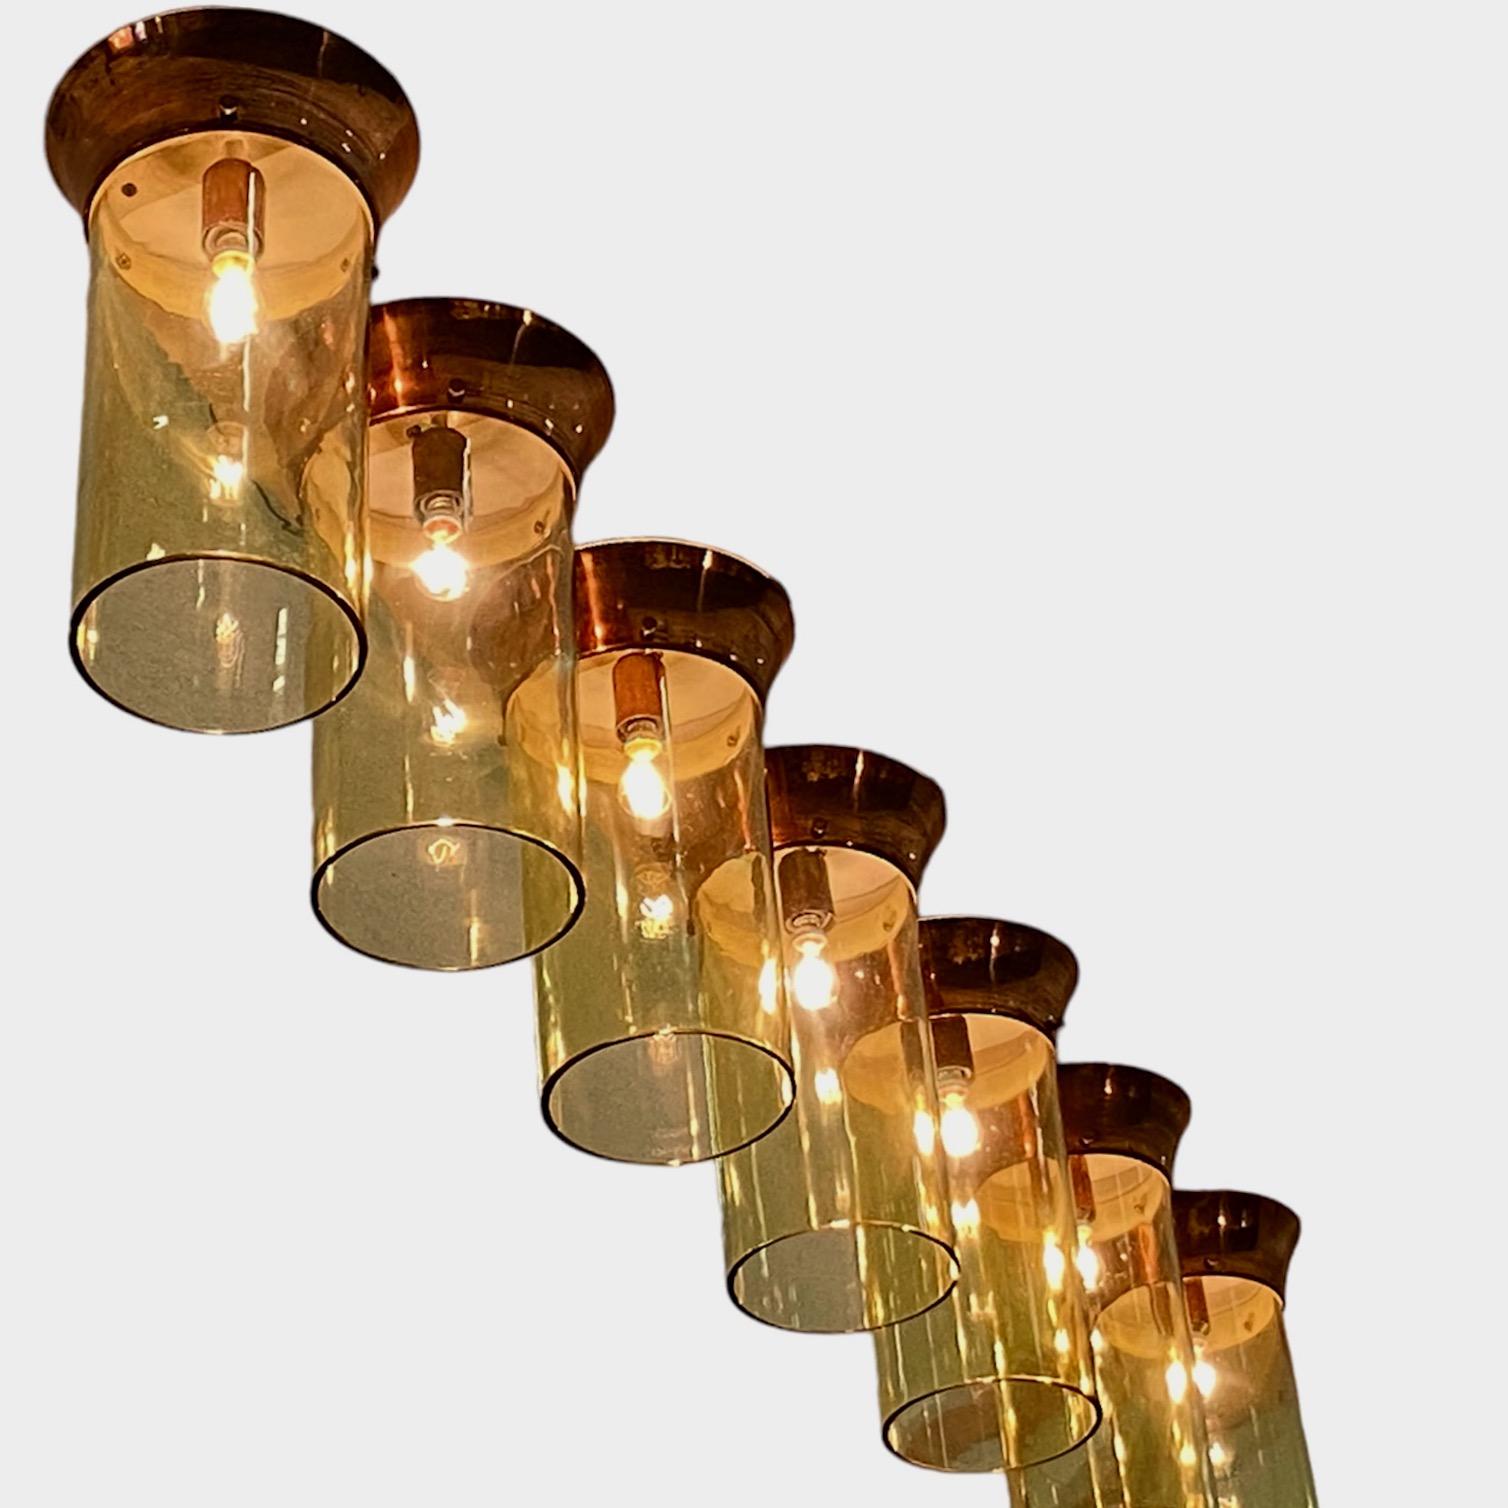 A rare large Set of 9 x vintage Italian copper and amber glass plafonniers or Flush Mount ceiling lights. This is an interesting and unusual copper set that would look really good over a large kitchen island or in a long corridor.